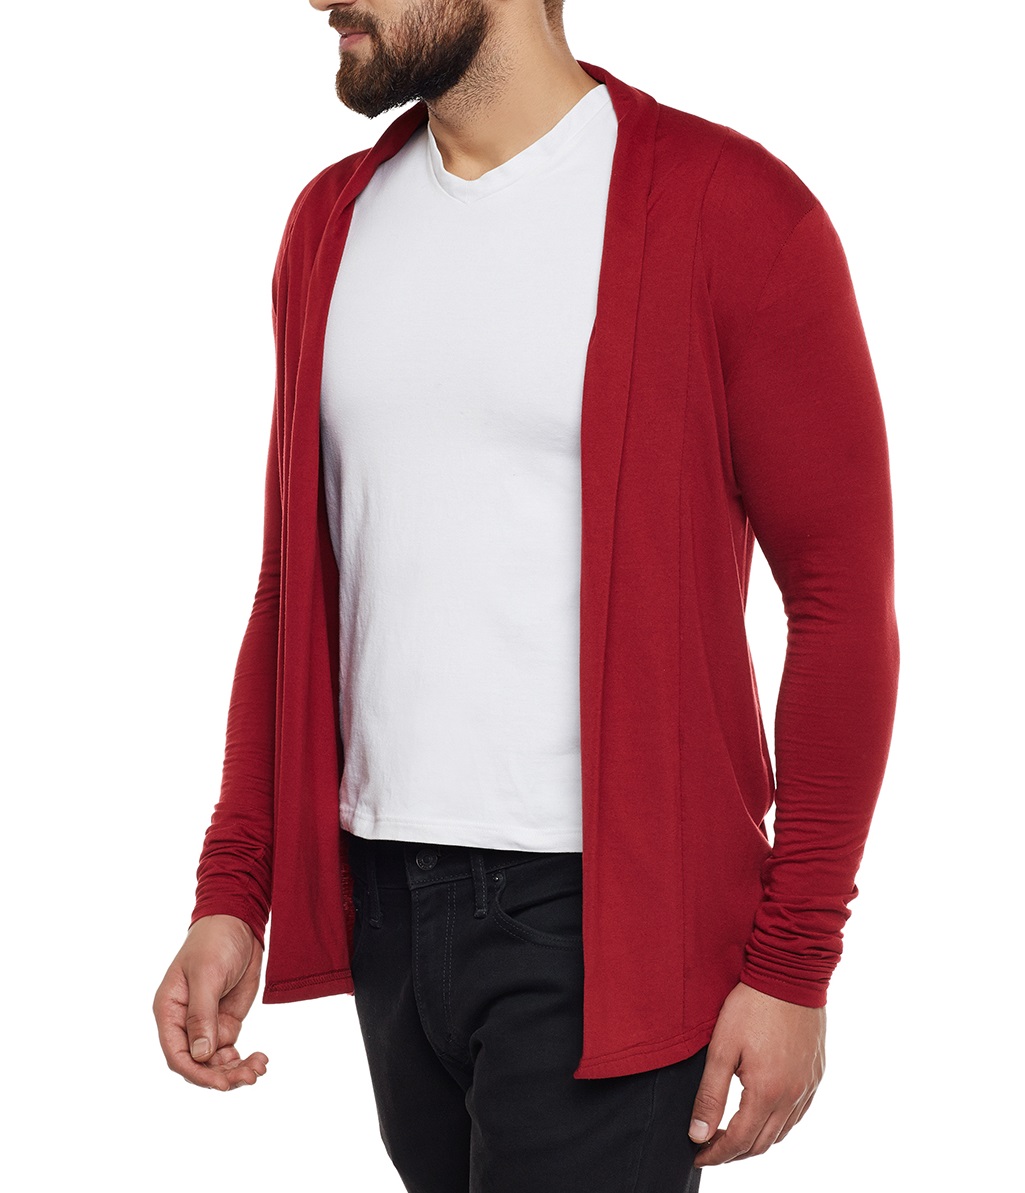 Buy Wittrends Men's Cotton Shawl Neck Shrug Online @ ₹599 from ShopClues